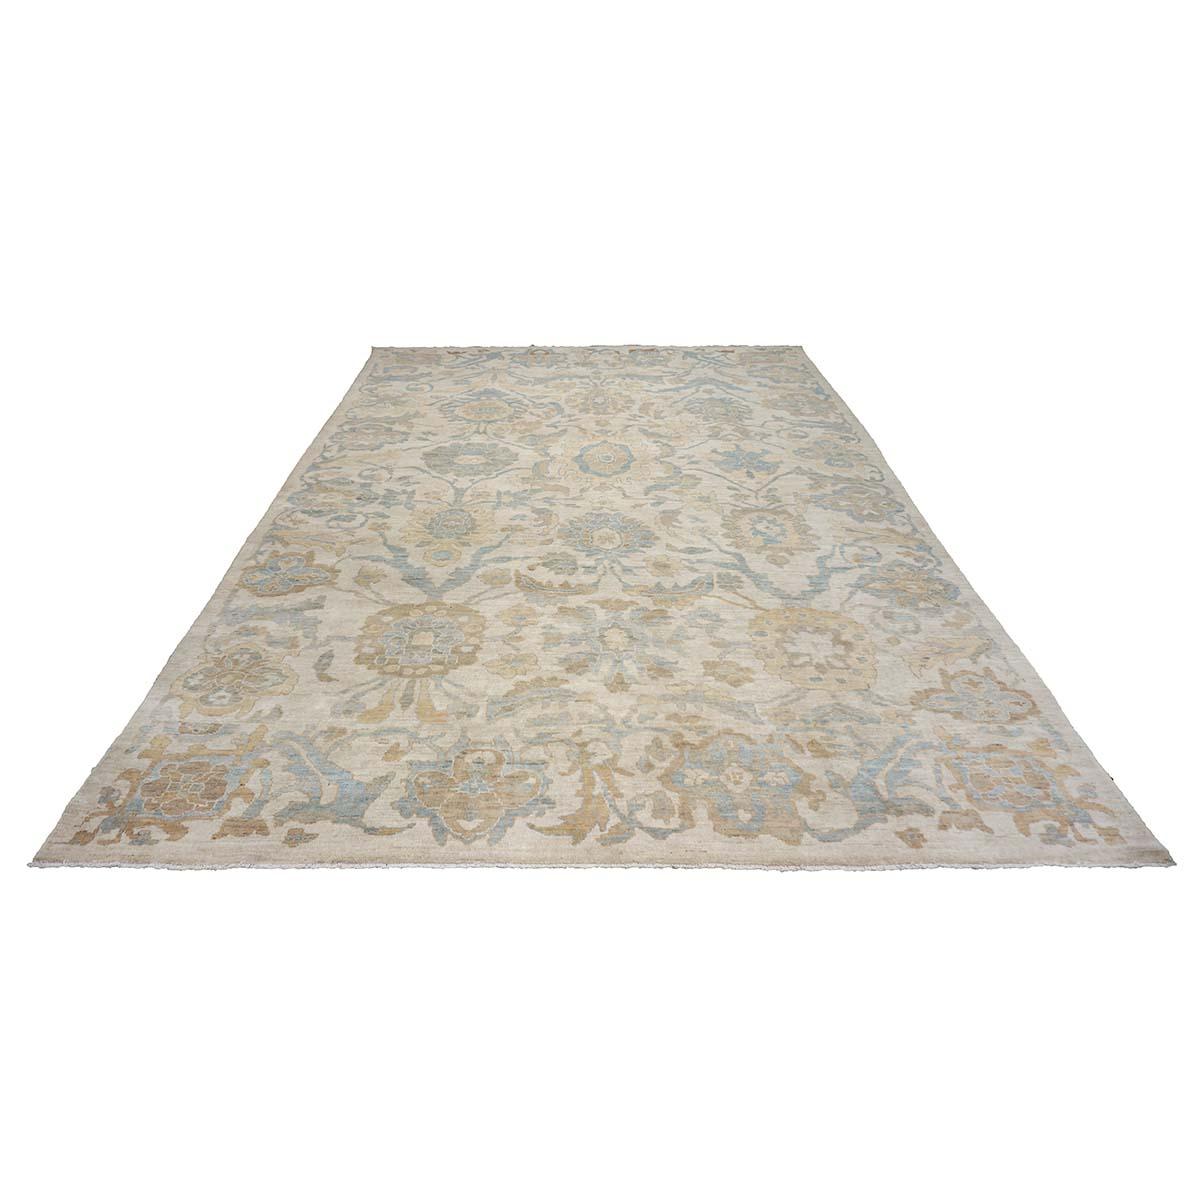 Ashly Fine Rugs presents an antique recreation of an original Persian Sultanabad 10x14 Ivory, Tan, & Blue Handmade Area Rug. Part of our own previous production, this antique recreation was thought of and created in-house and 100% handmade in Iran